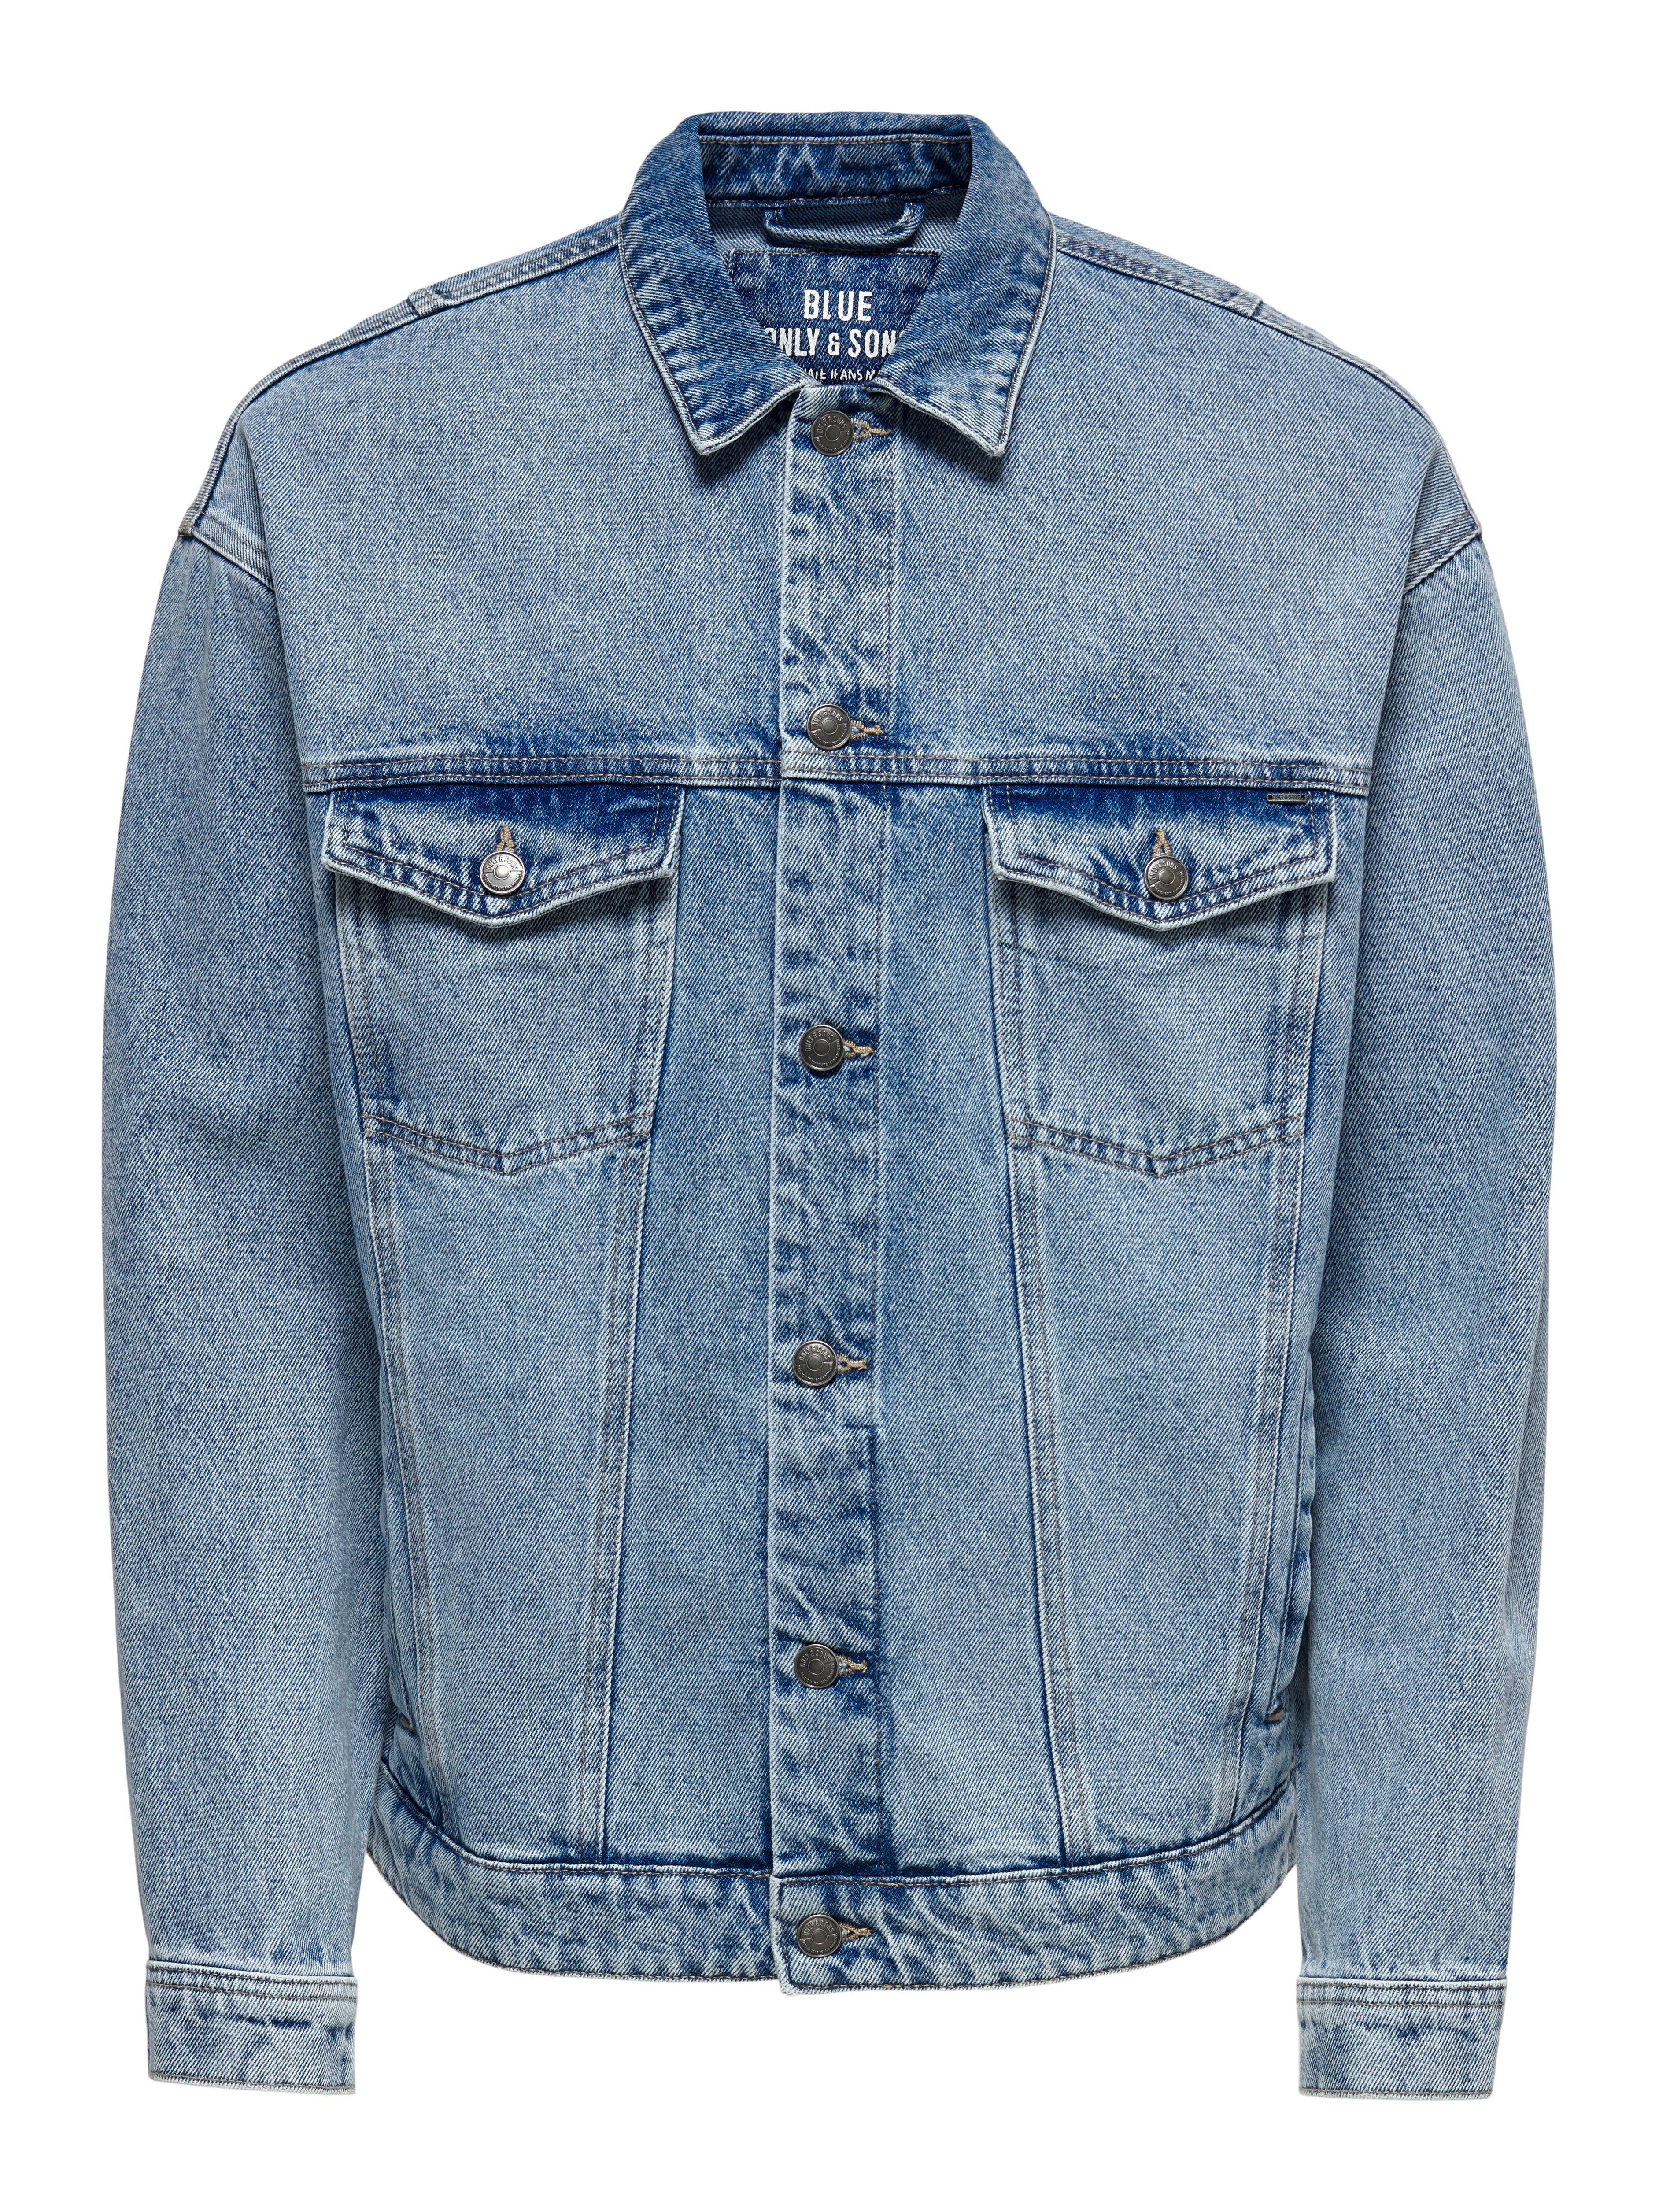 Men Relaxed Fit Light Blue Color Denim Jacket with Soft Sherpa Lined  Collarand Double Chest&Waist-Side Pockets Trucker Style Jacket - China  Bootcut Pants and Women Denim Jeans price | Made-in-China.com